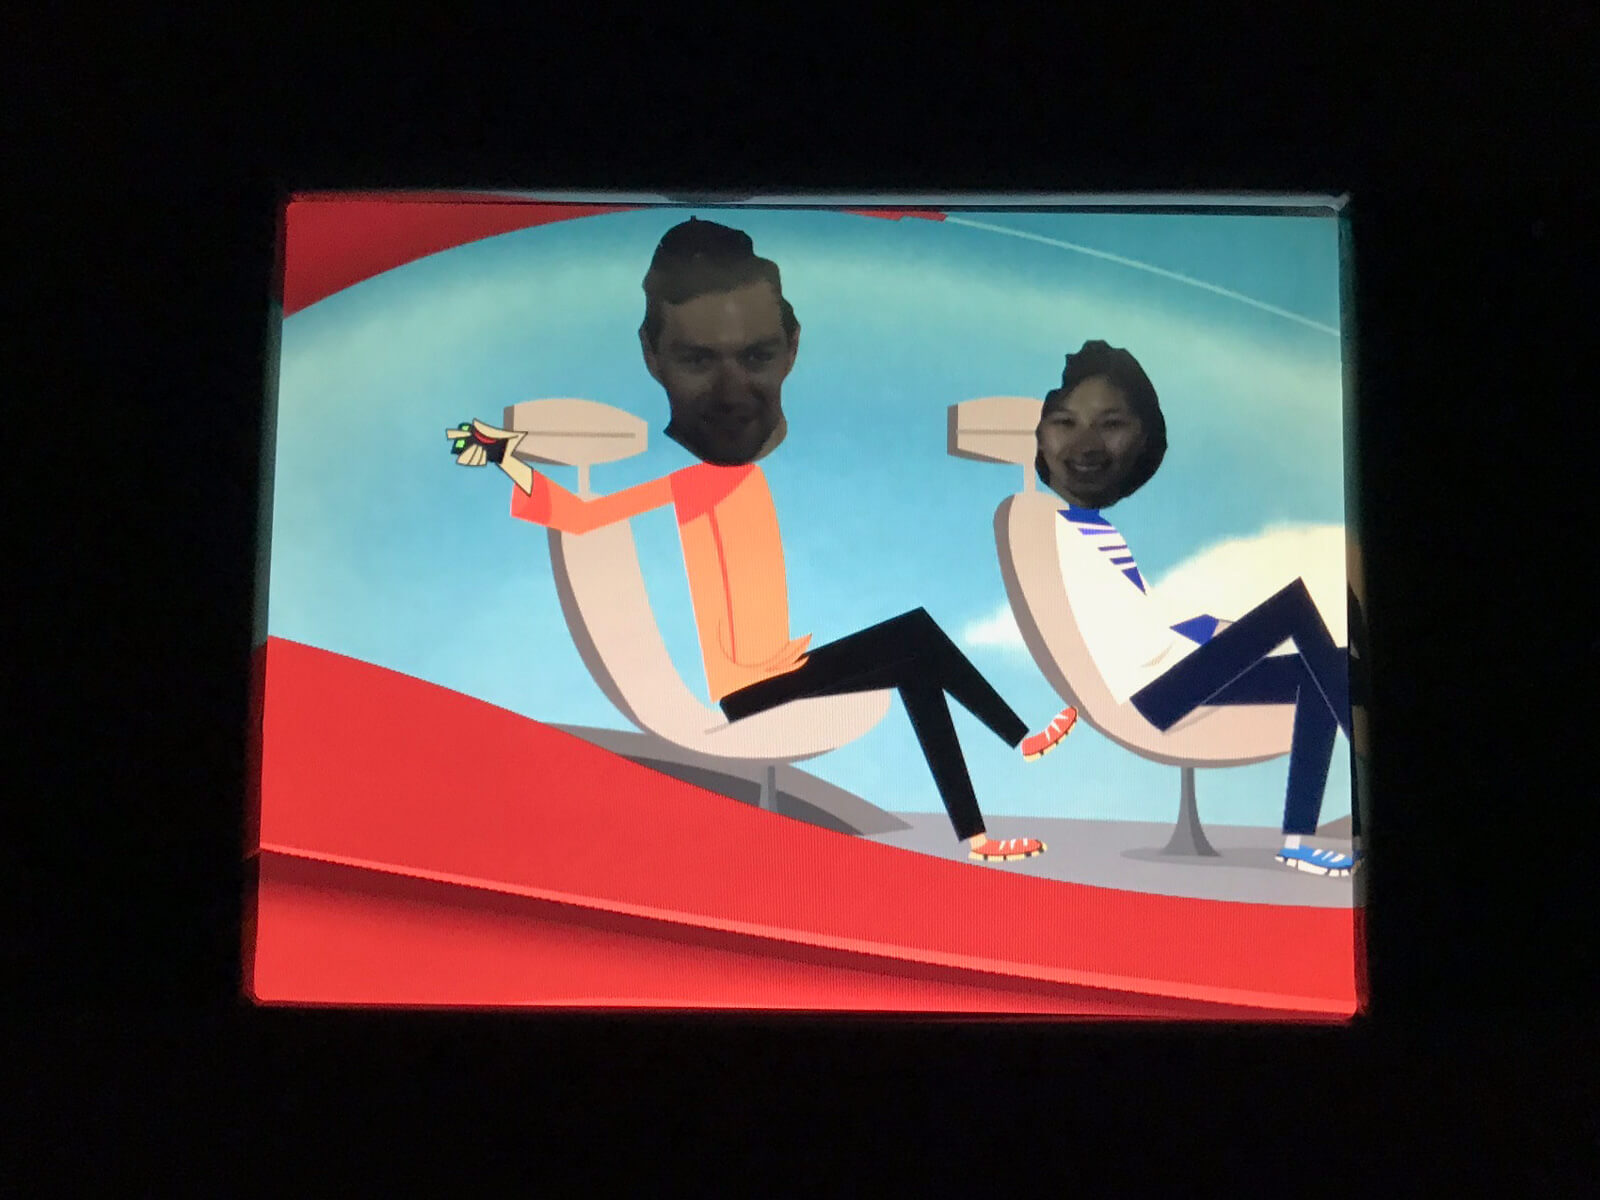 A screen showing two cartoon figures on chairs, with a manâ€™s face and a womanâ€™s face superimposed on them